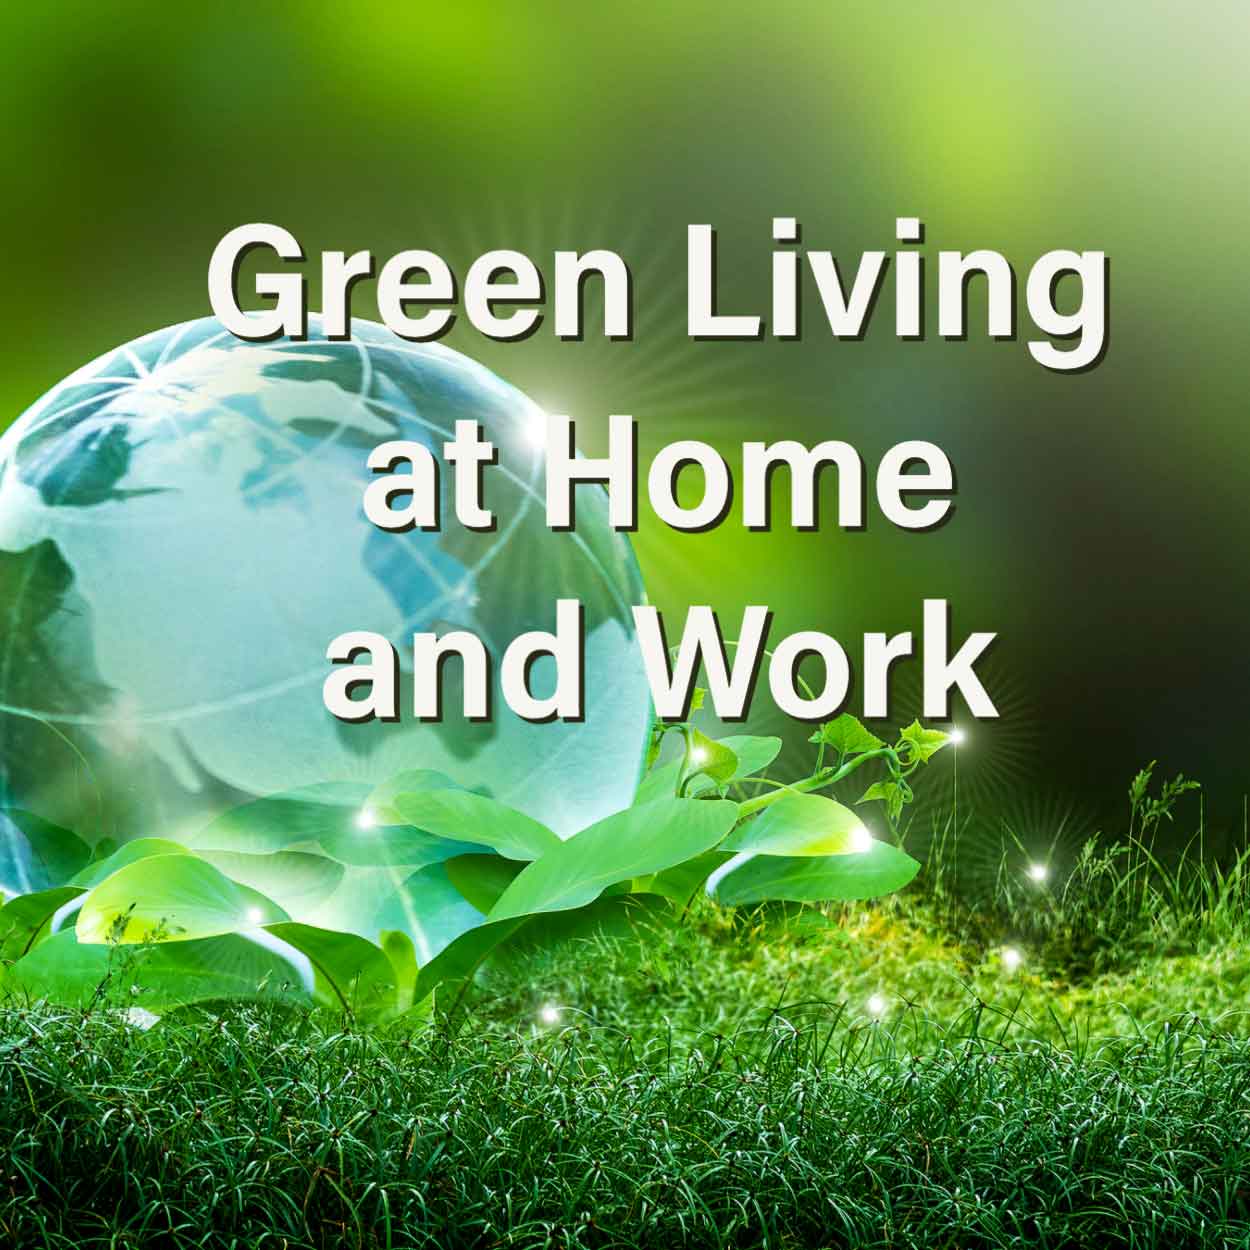 Green Living at Home and Work